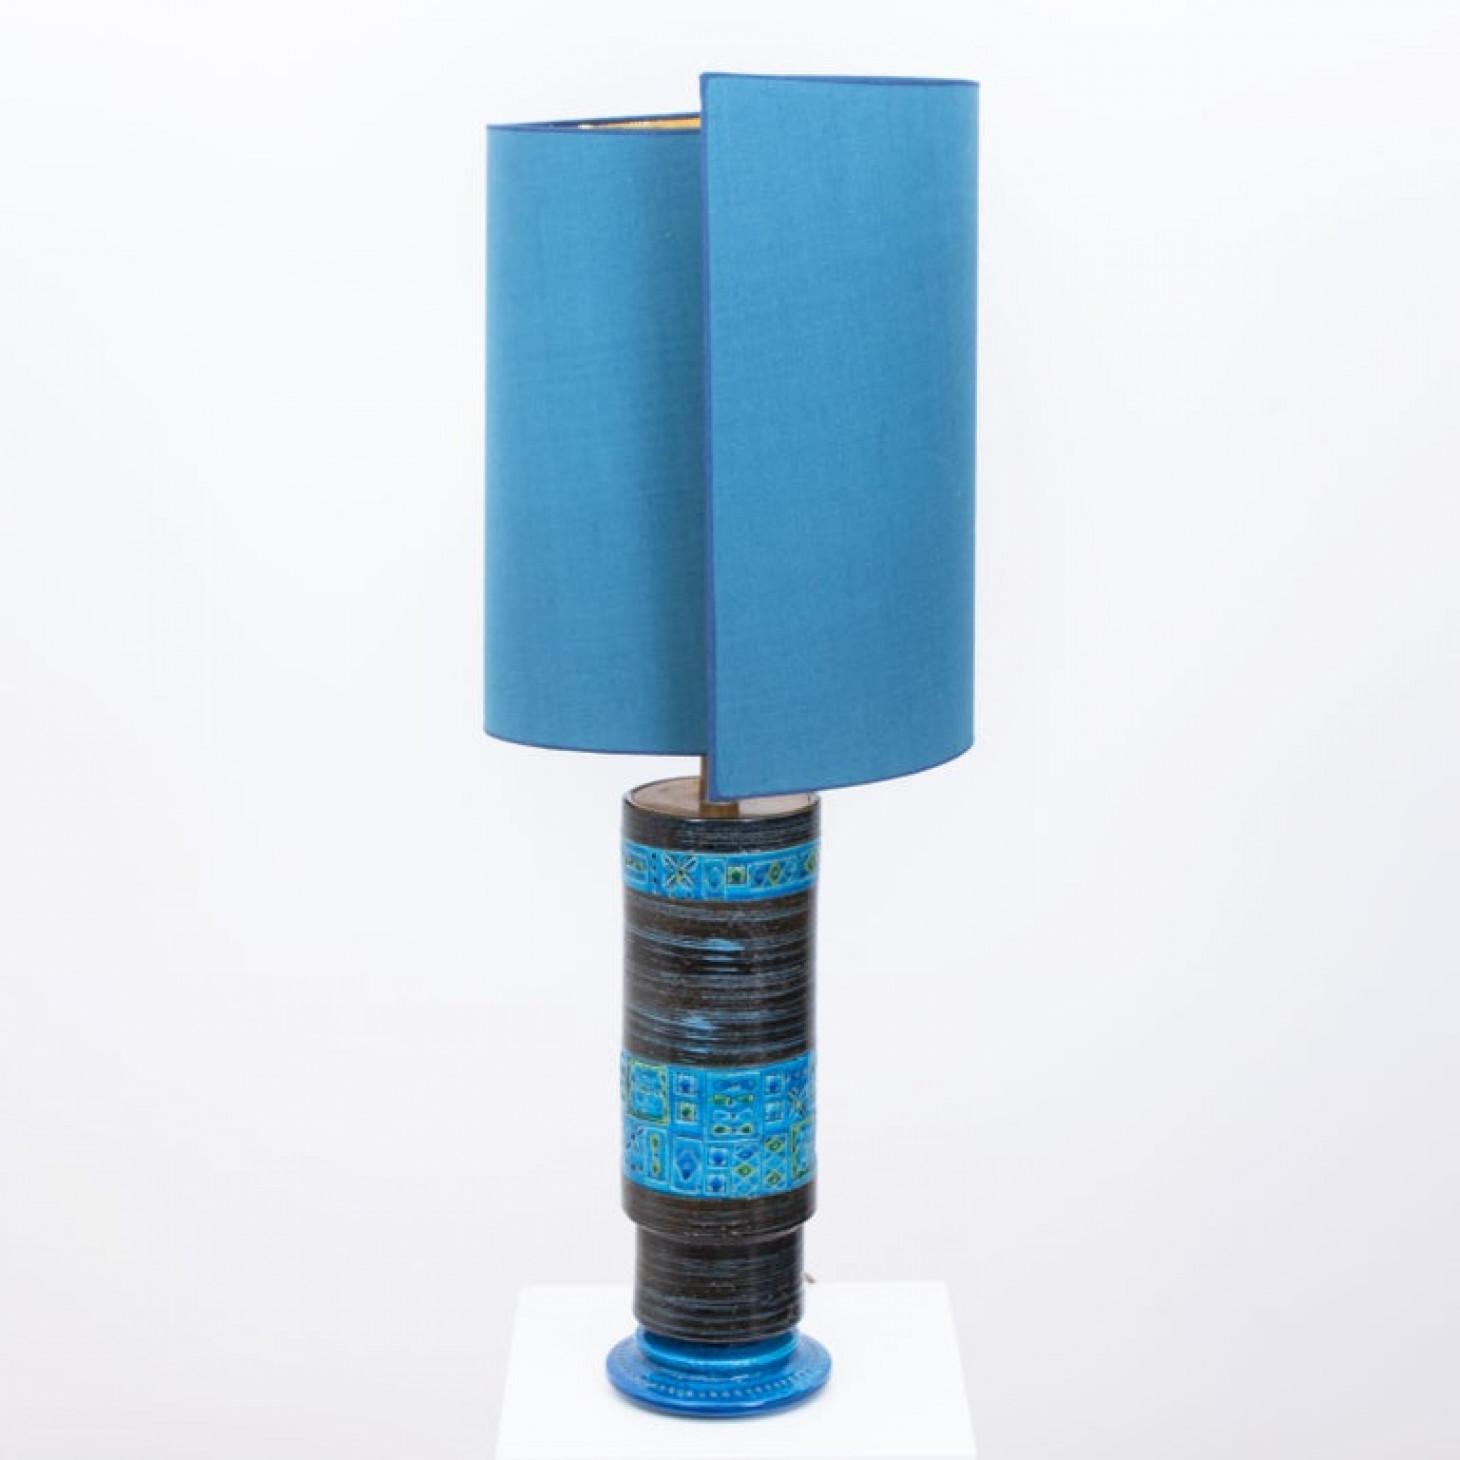 Beautiful ceramic lamp by Bitossi, Italy, 1960s. A sculptural high-end piece made of handmade ceramic in blue or grey or green tones, with a combination of dry and glazed finishes. With a special new custom made blue silk lamp shade with warm gold